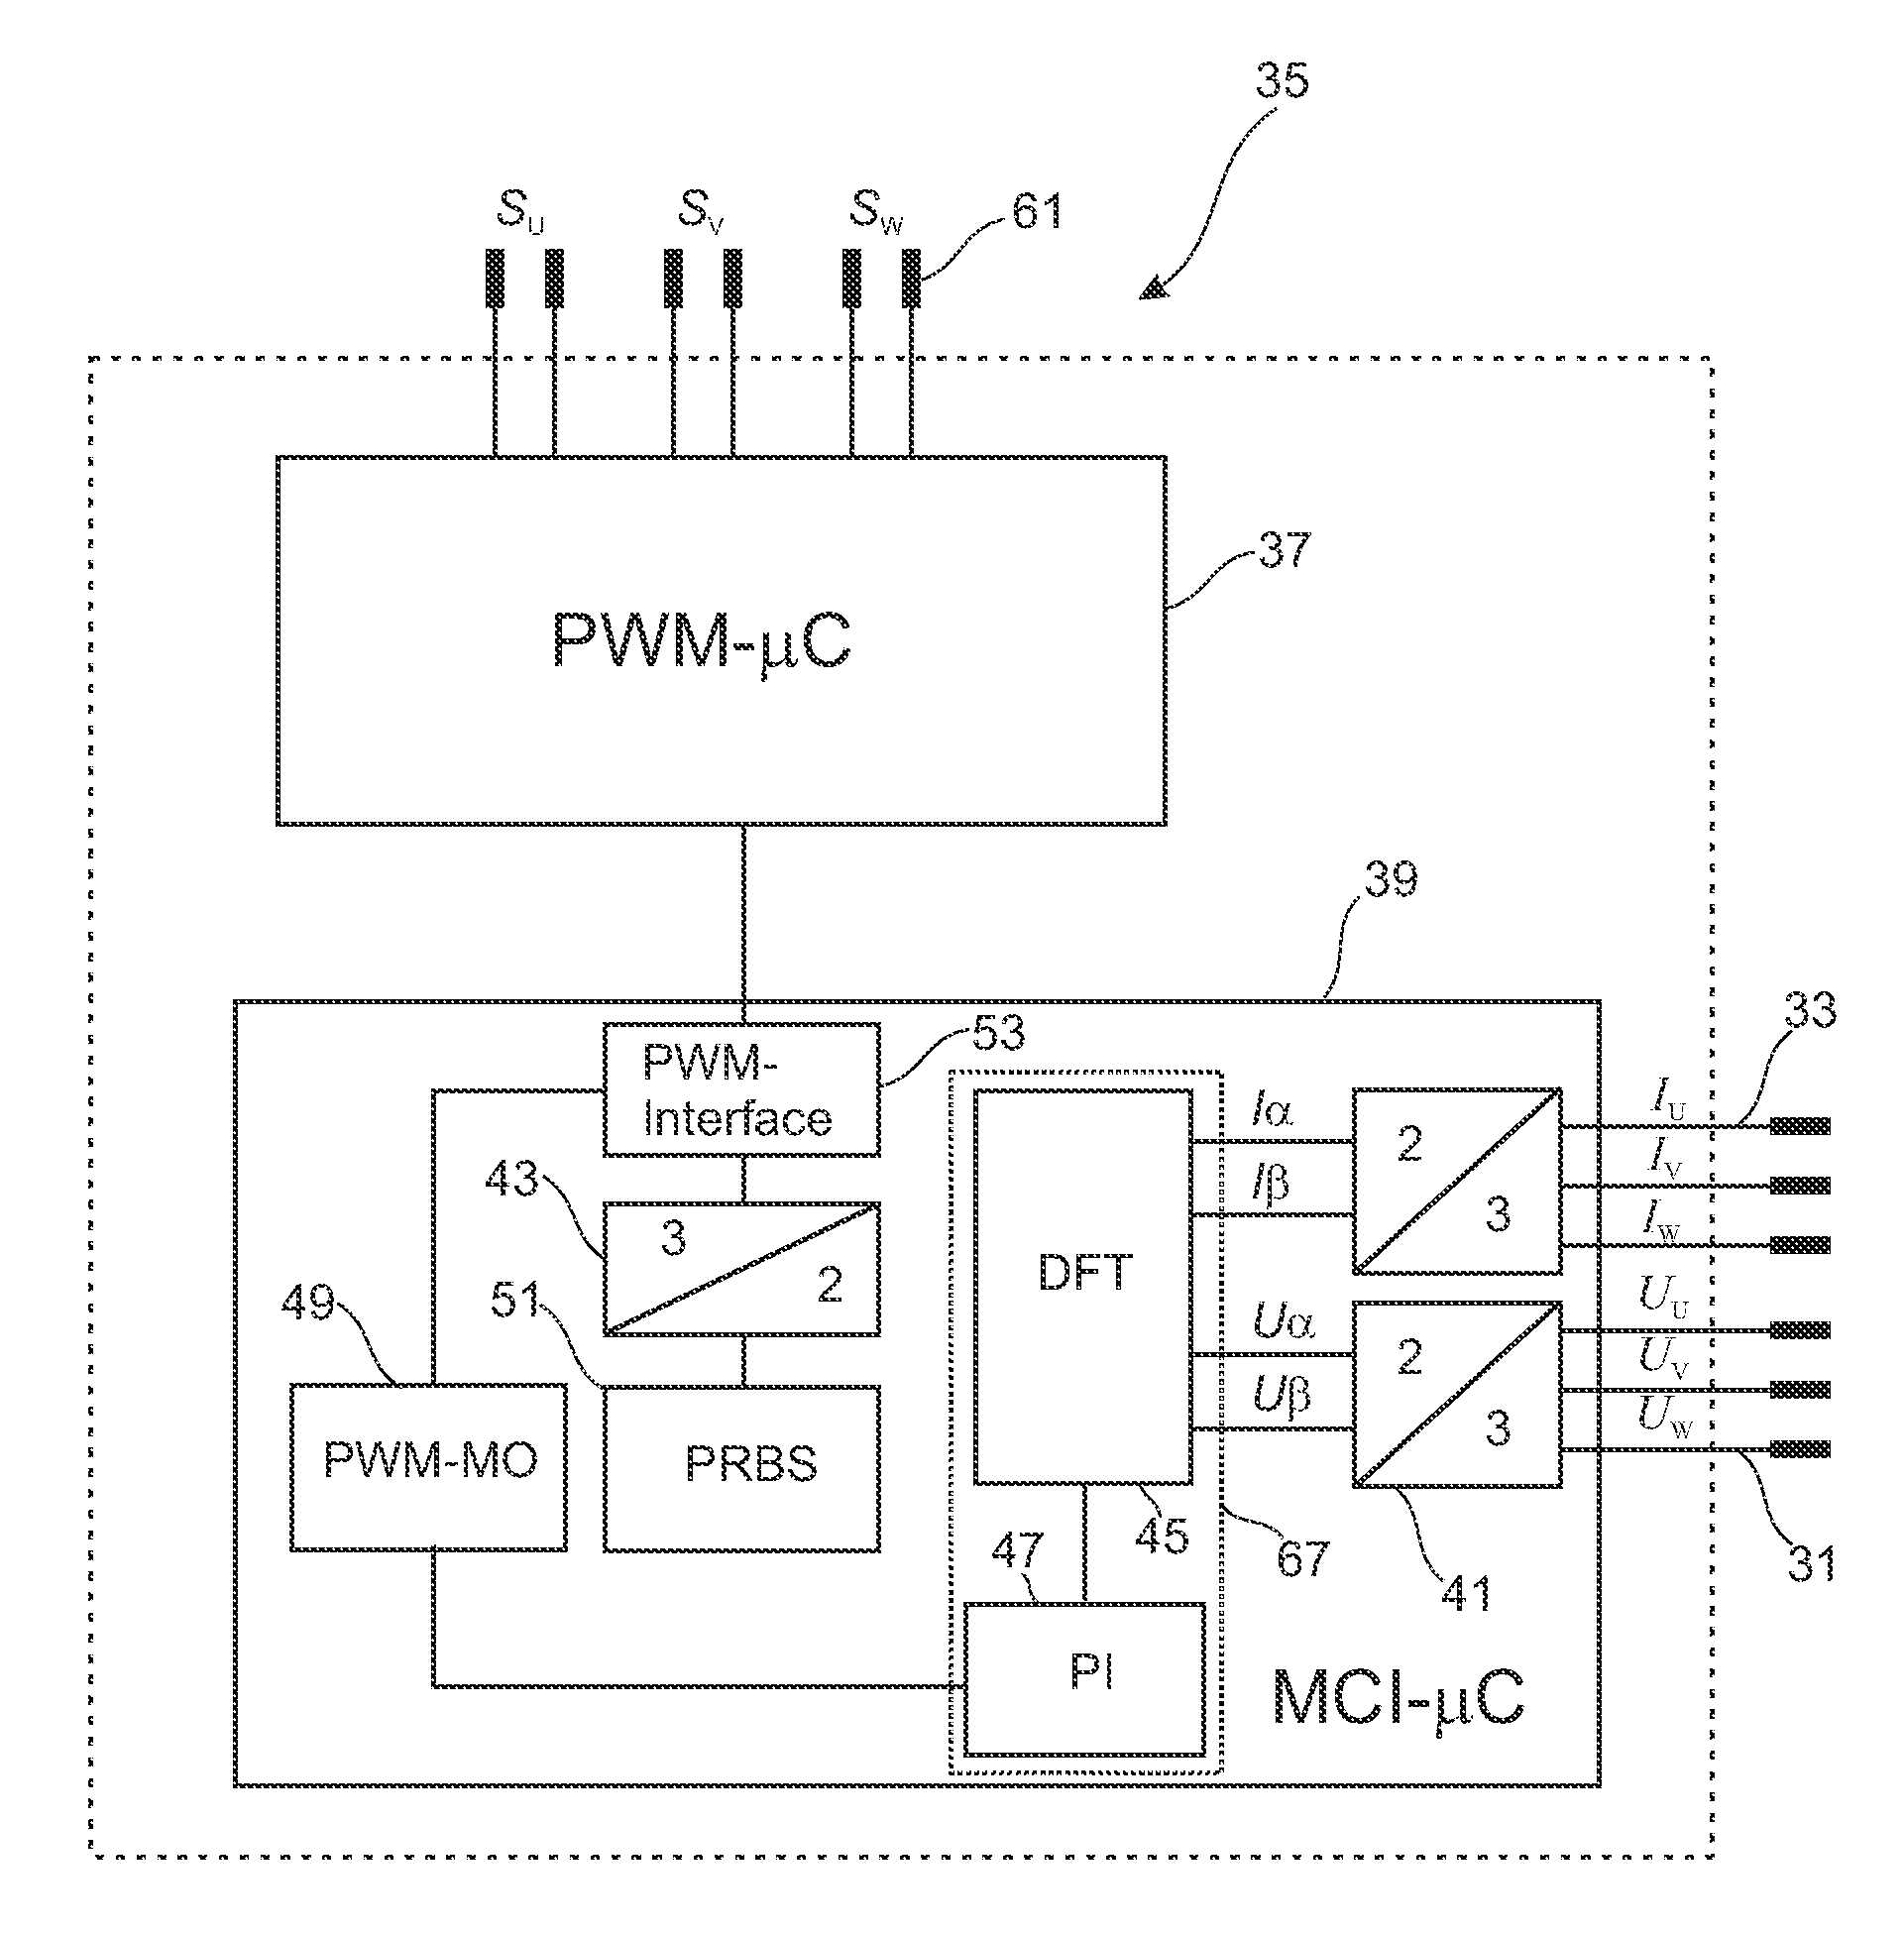 Apparatus And Method For Sensorless Identification Of Rotating Electrical Equivalent Circuit Parameters Of A Three-Phase Asynchronous Motor